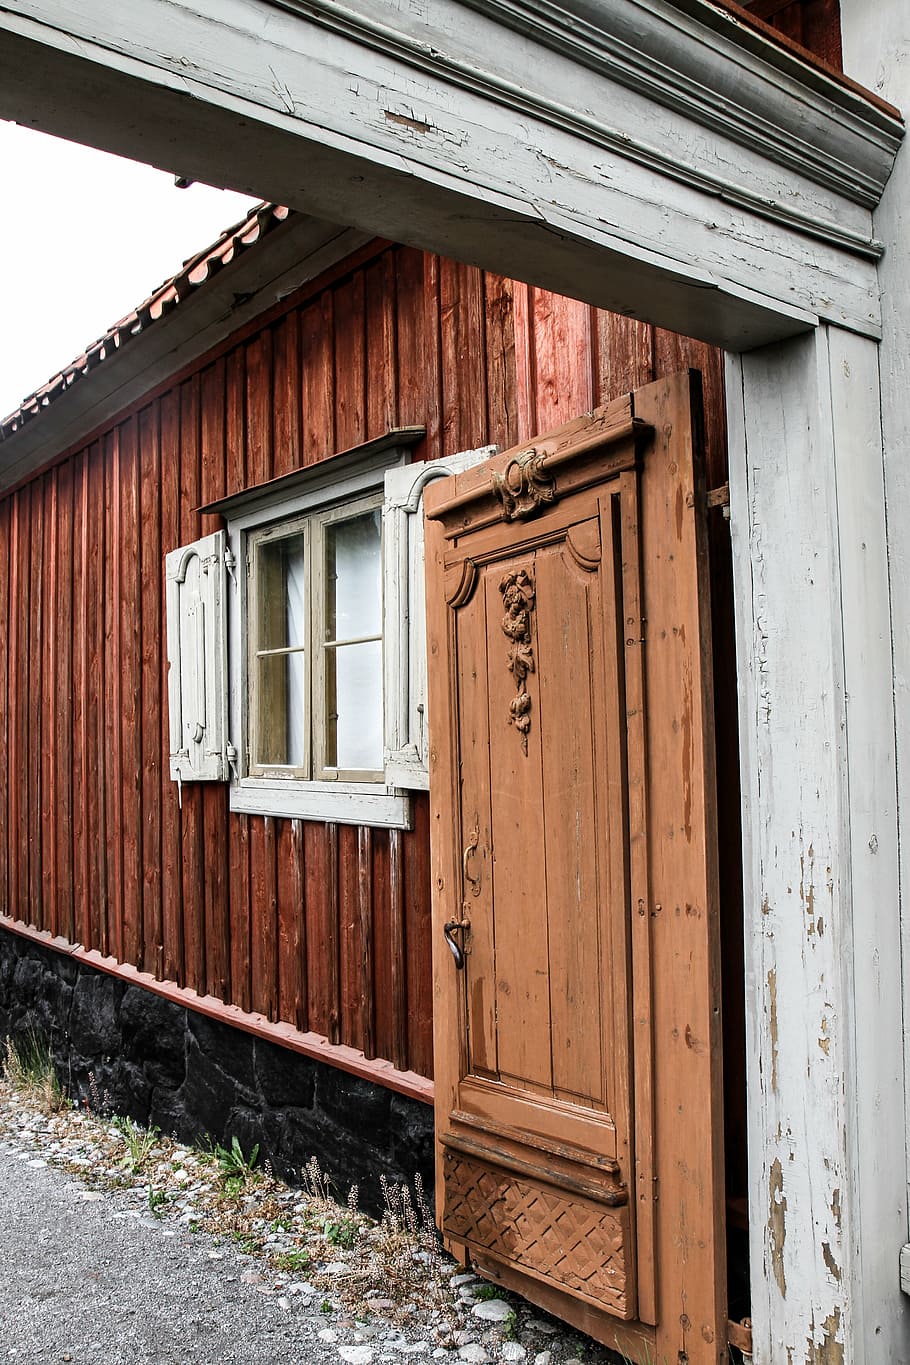 house, facade, older, door, architecture, built structure, wood - material